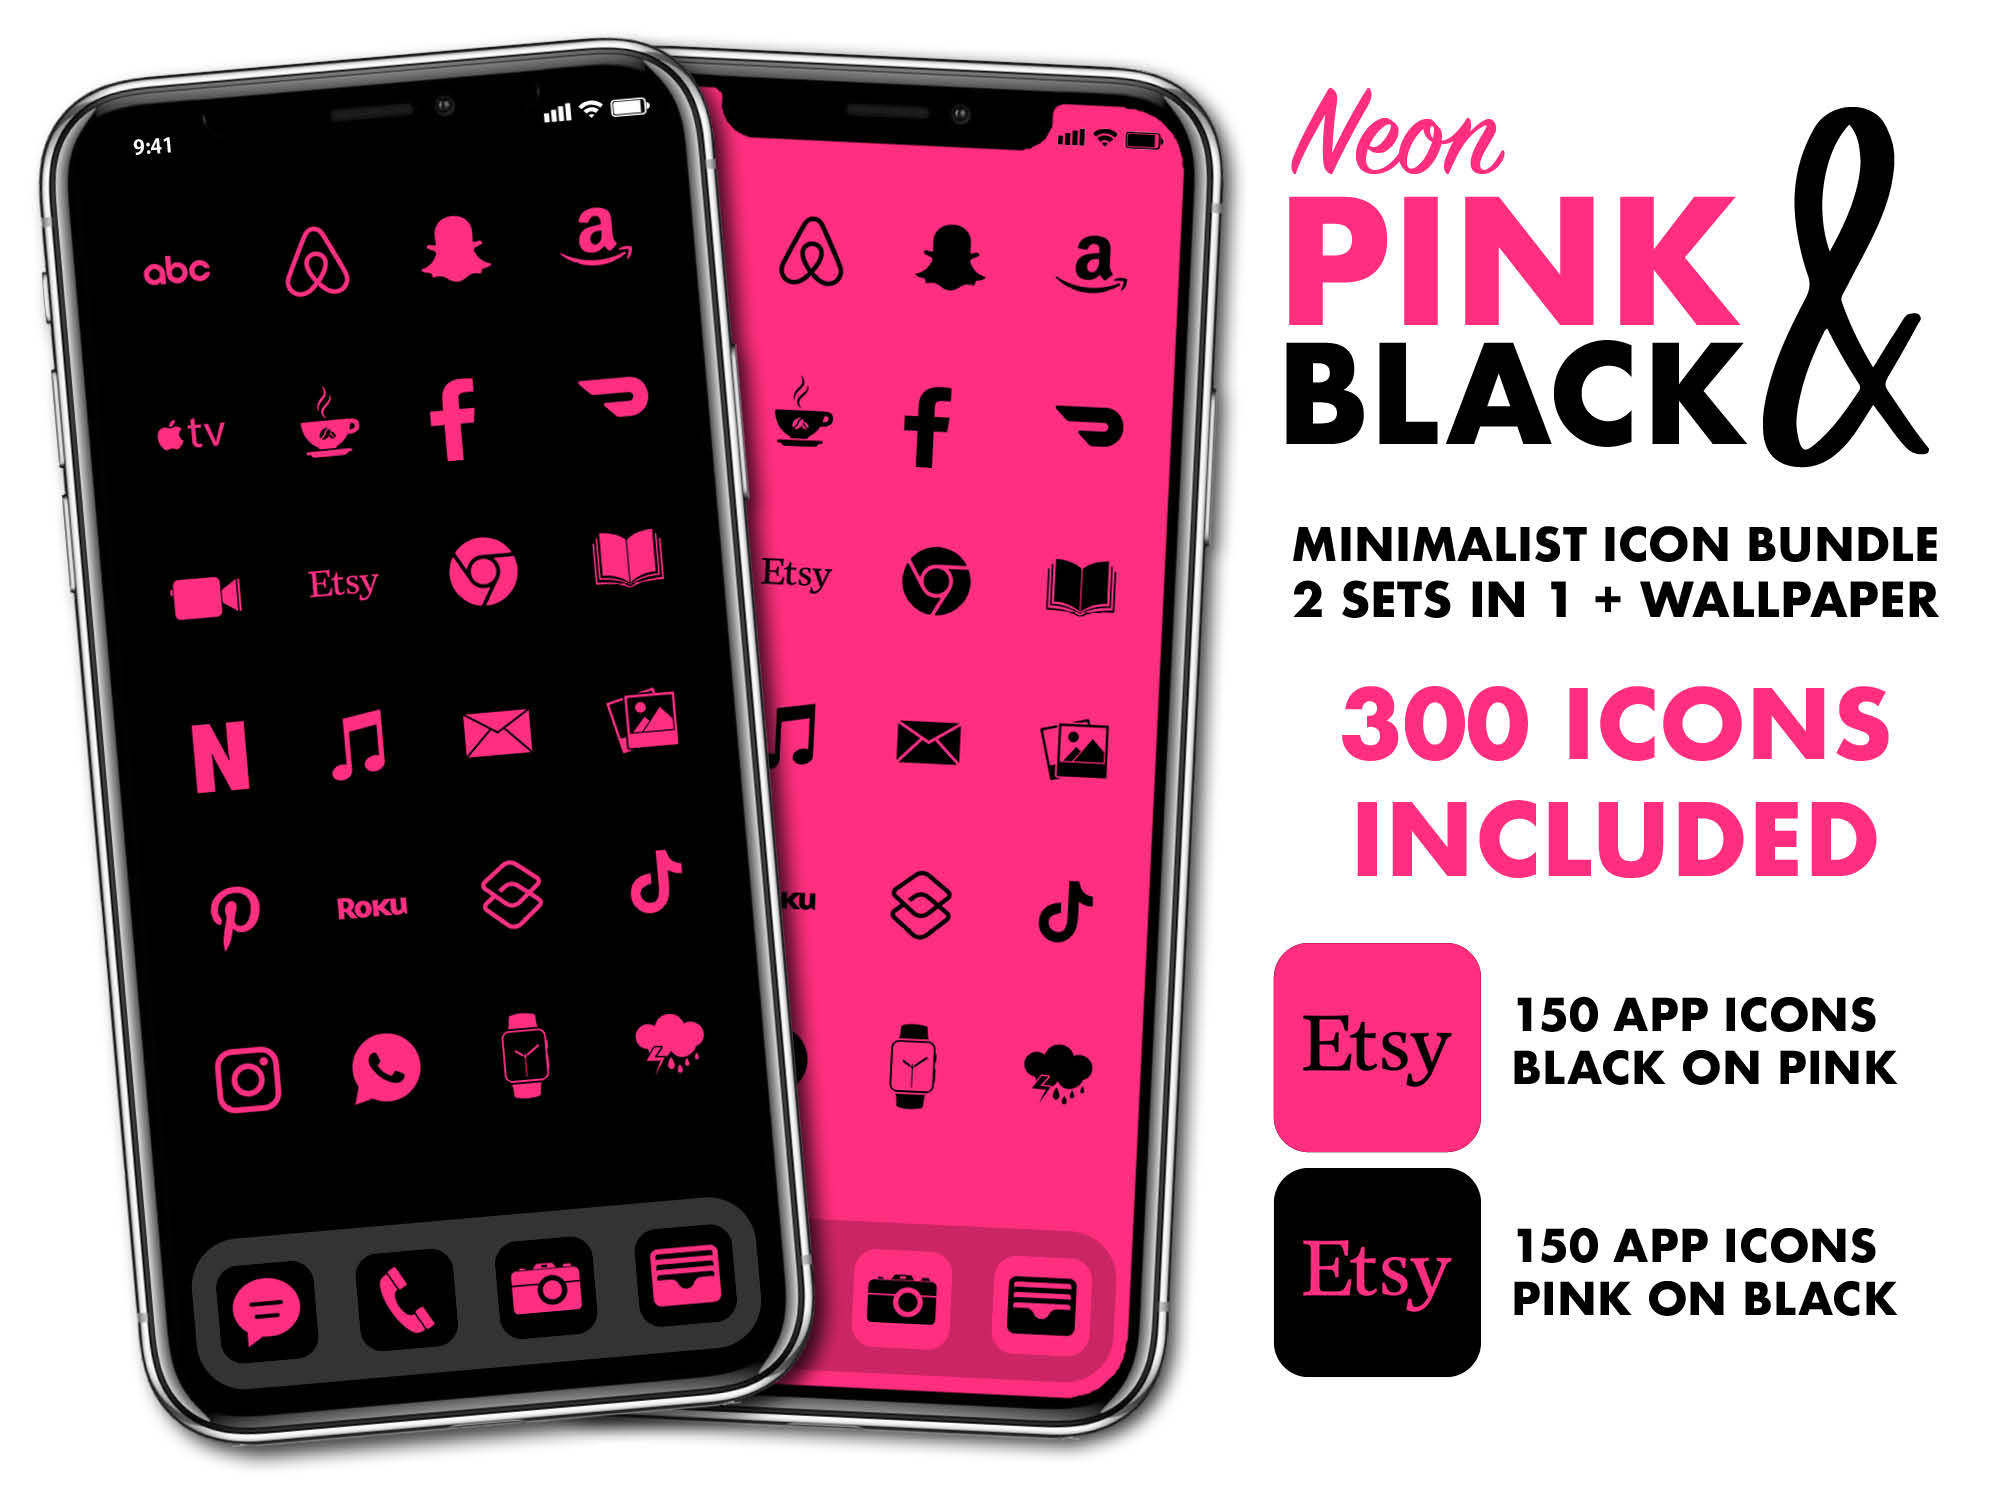 Iphone App Icons Pink Explore Tumblr Posts And Blogs Tumgir